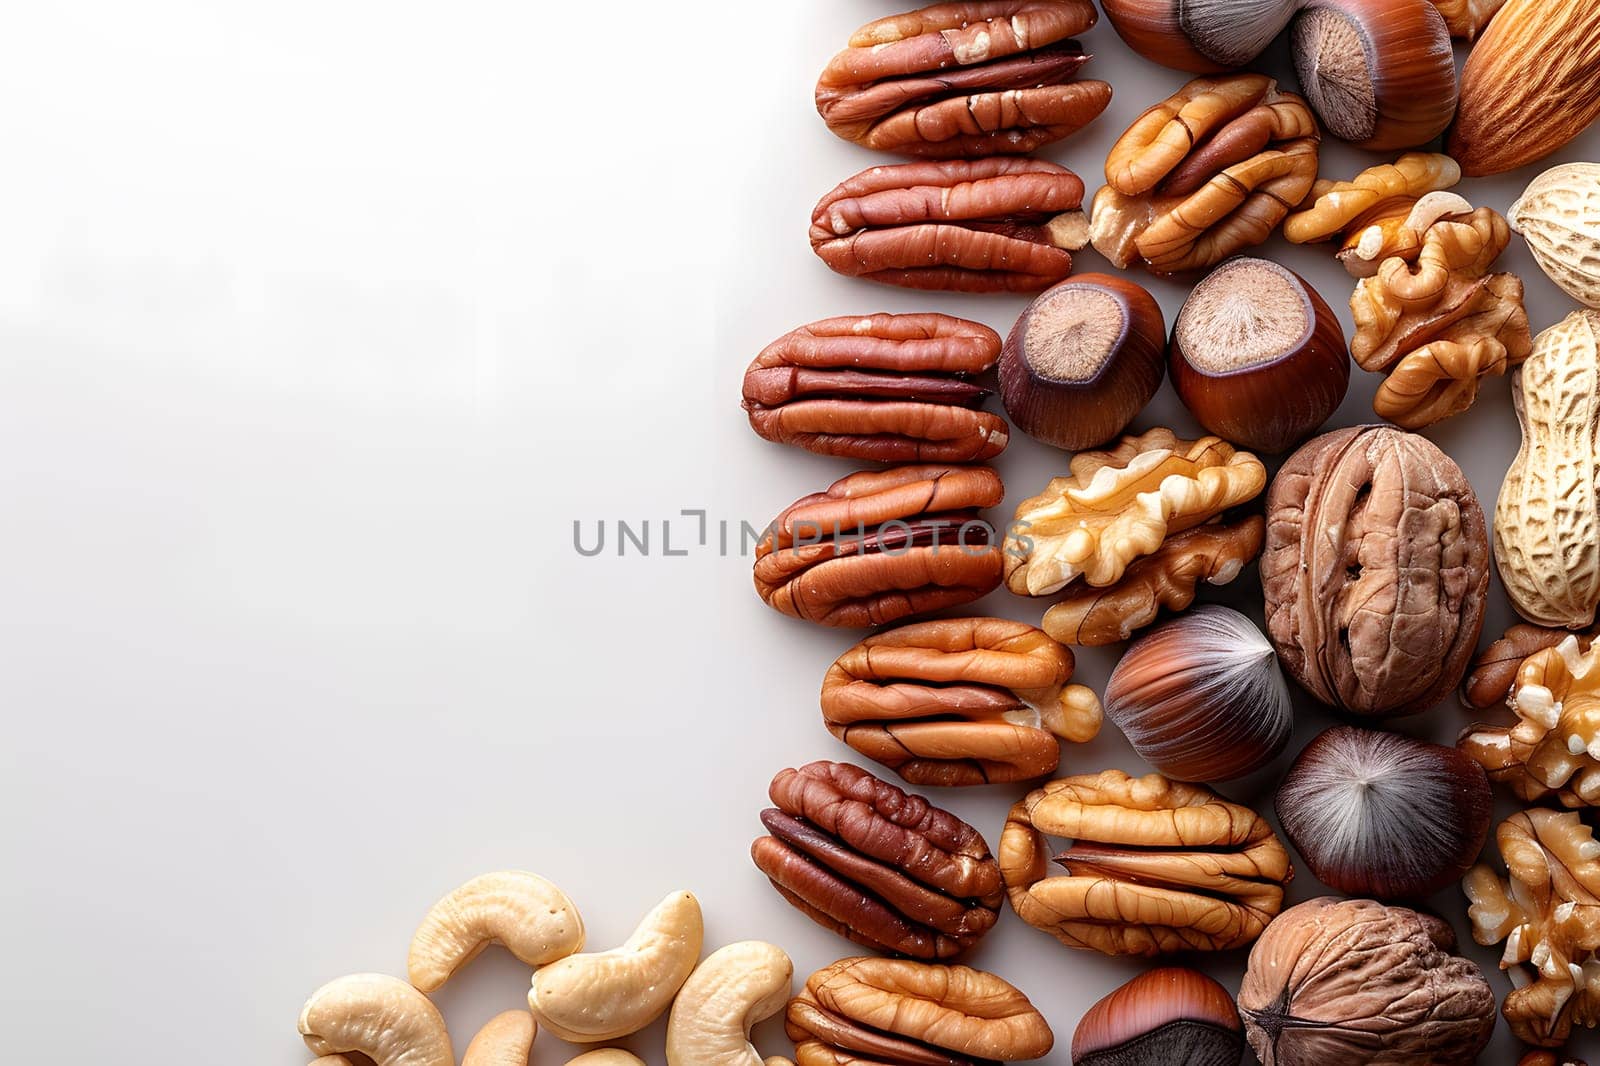 A variety of nuts, a plantbased ingredient, are arranged in a row on a white surface. These natural foods can be used in cuisine dishes for added flavor and texture